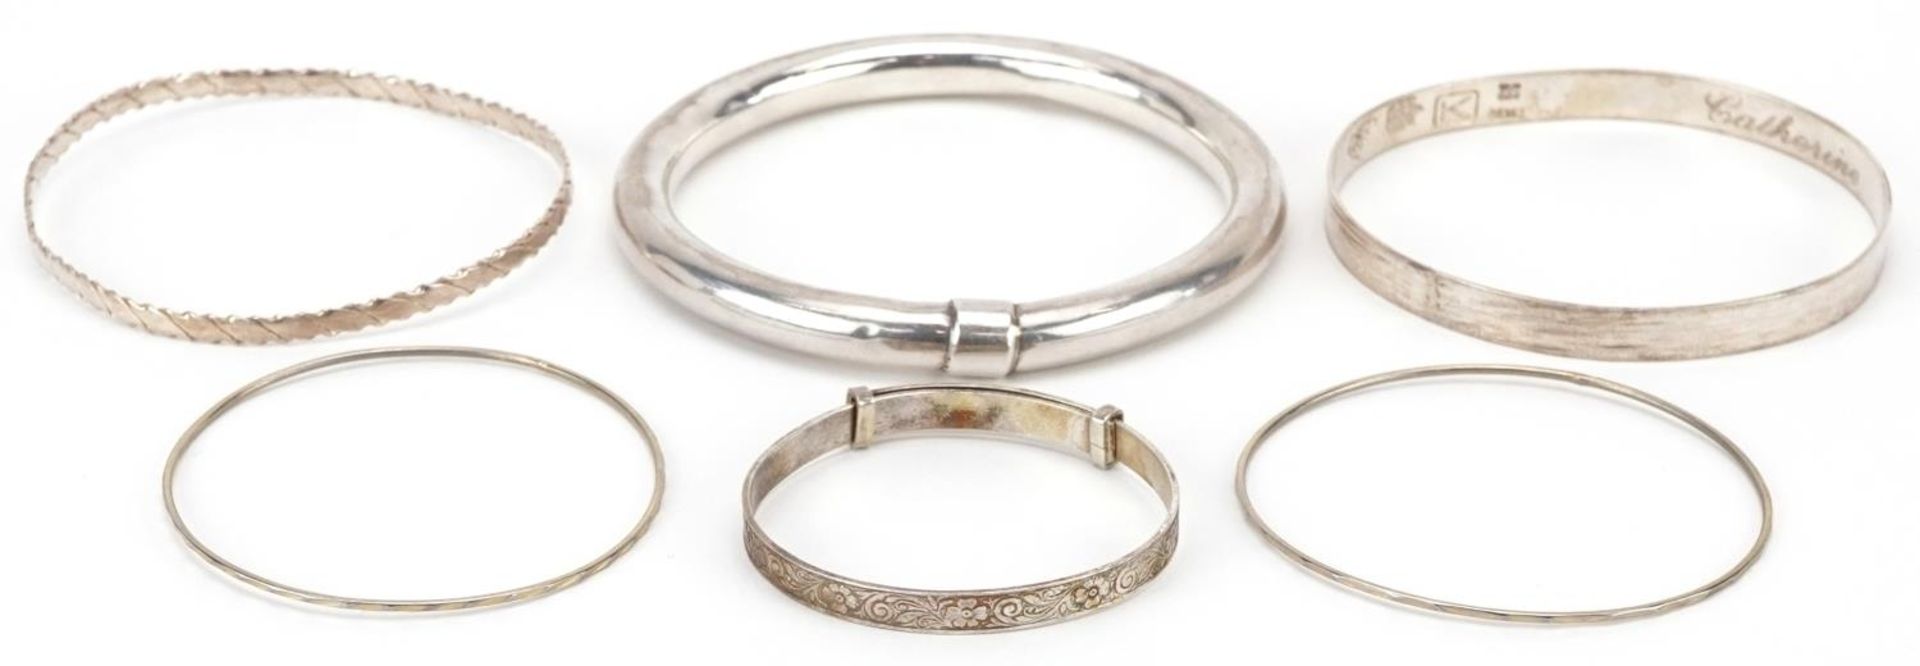 Six silver and white metal bangles including a christening bangle, the largest 8cm in diameter,